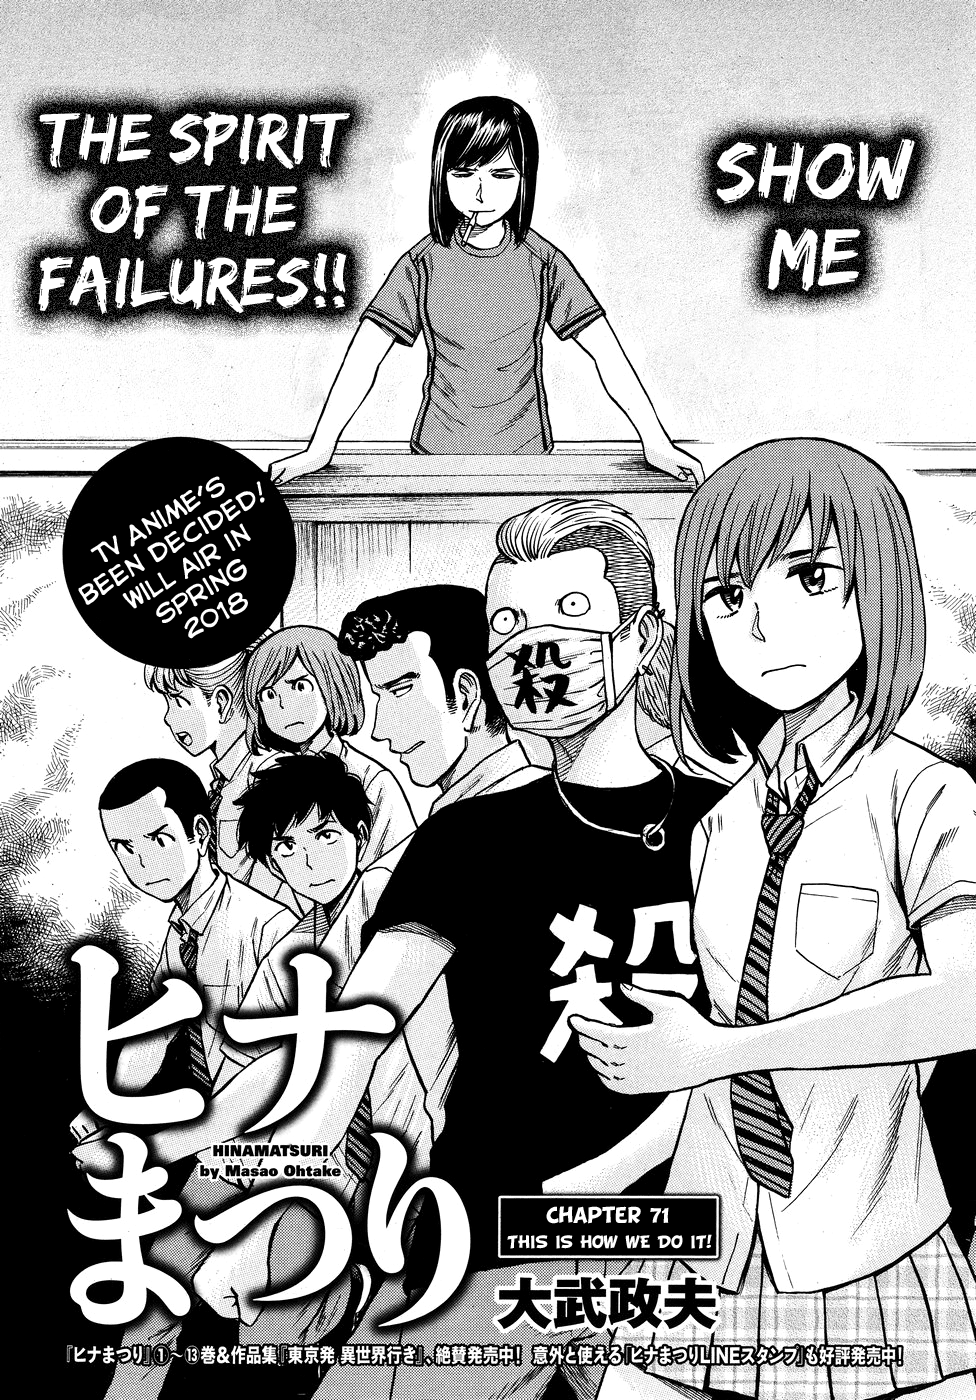 Hinamatsuri Vol.14-Chapter.71-This-is-how-we-do-it!! Image